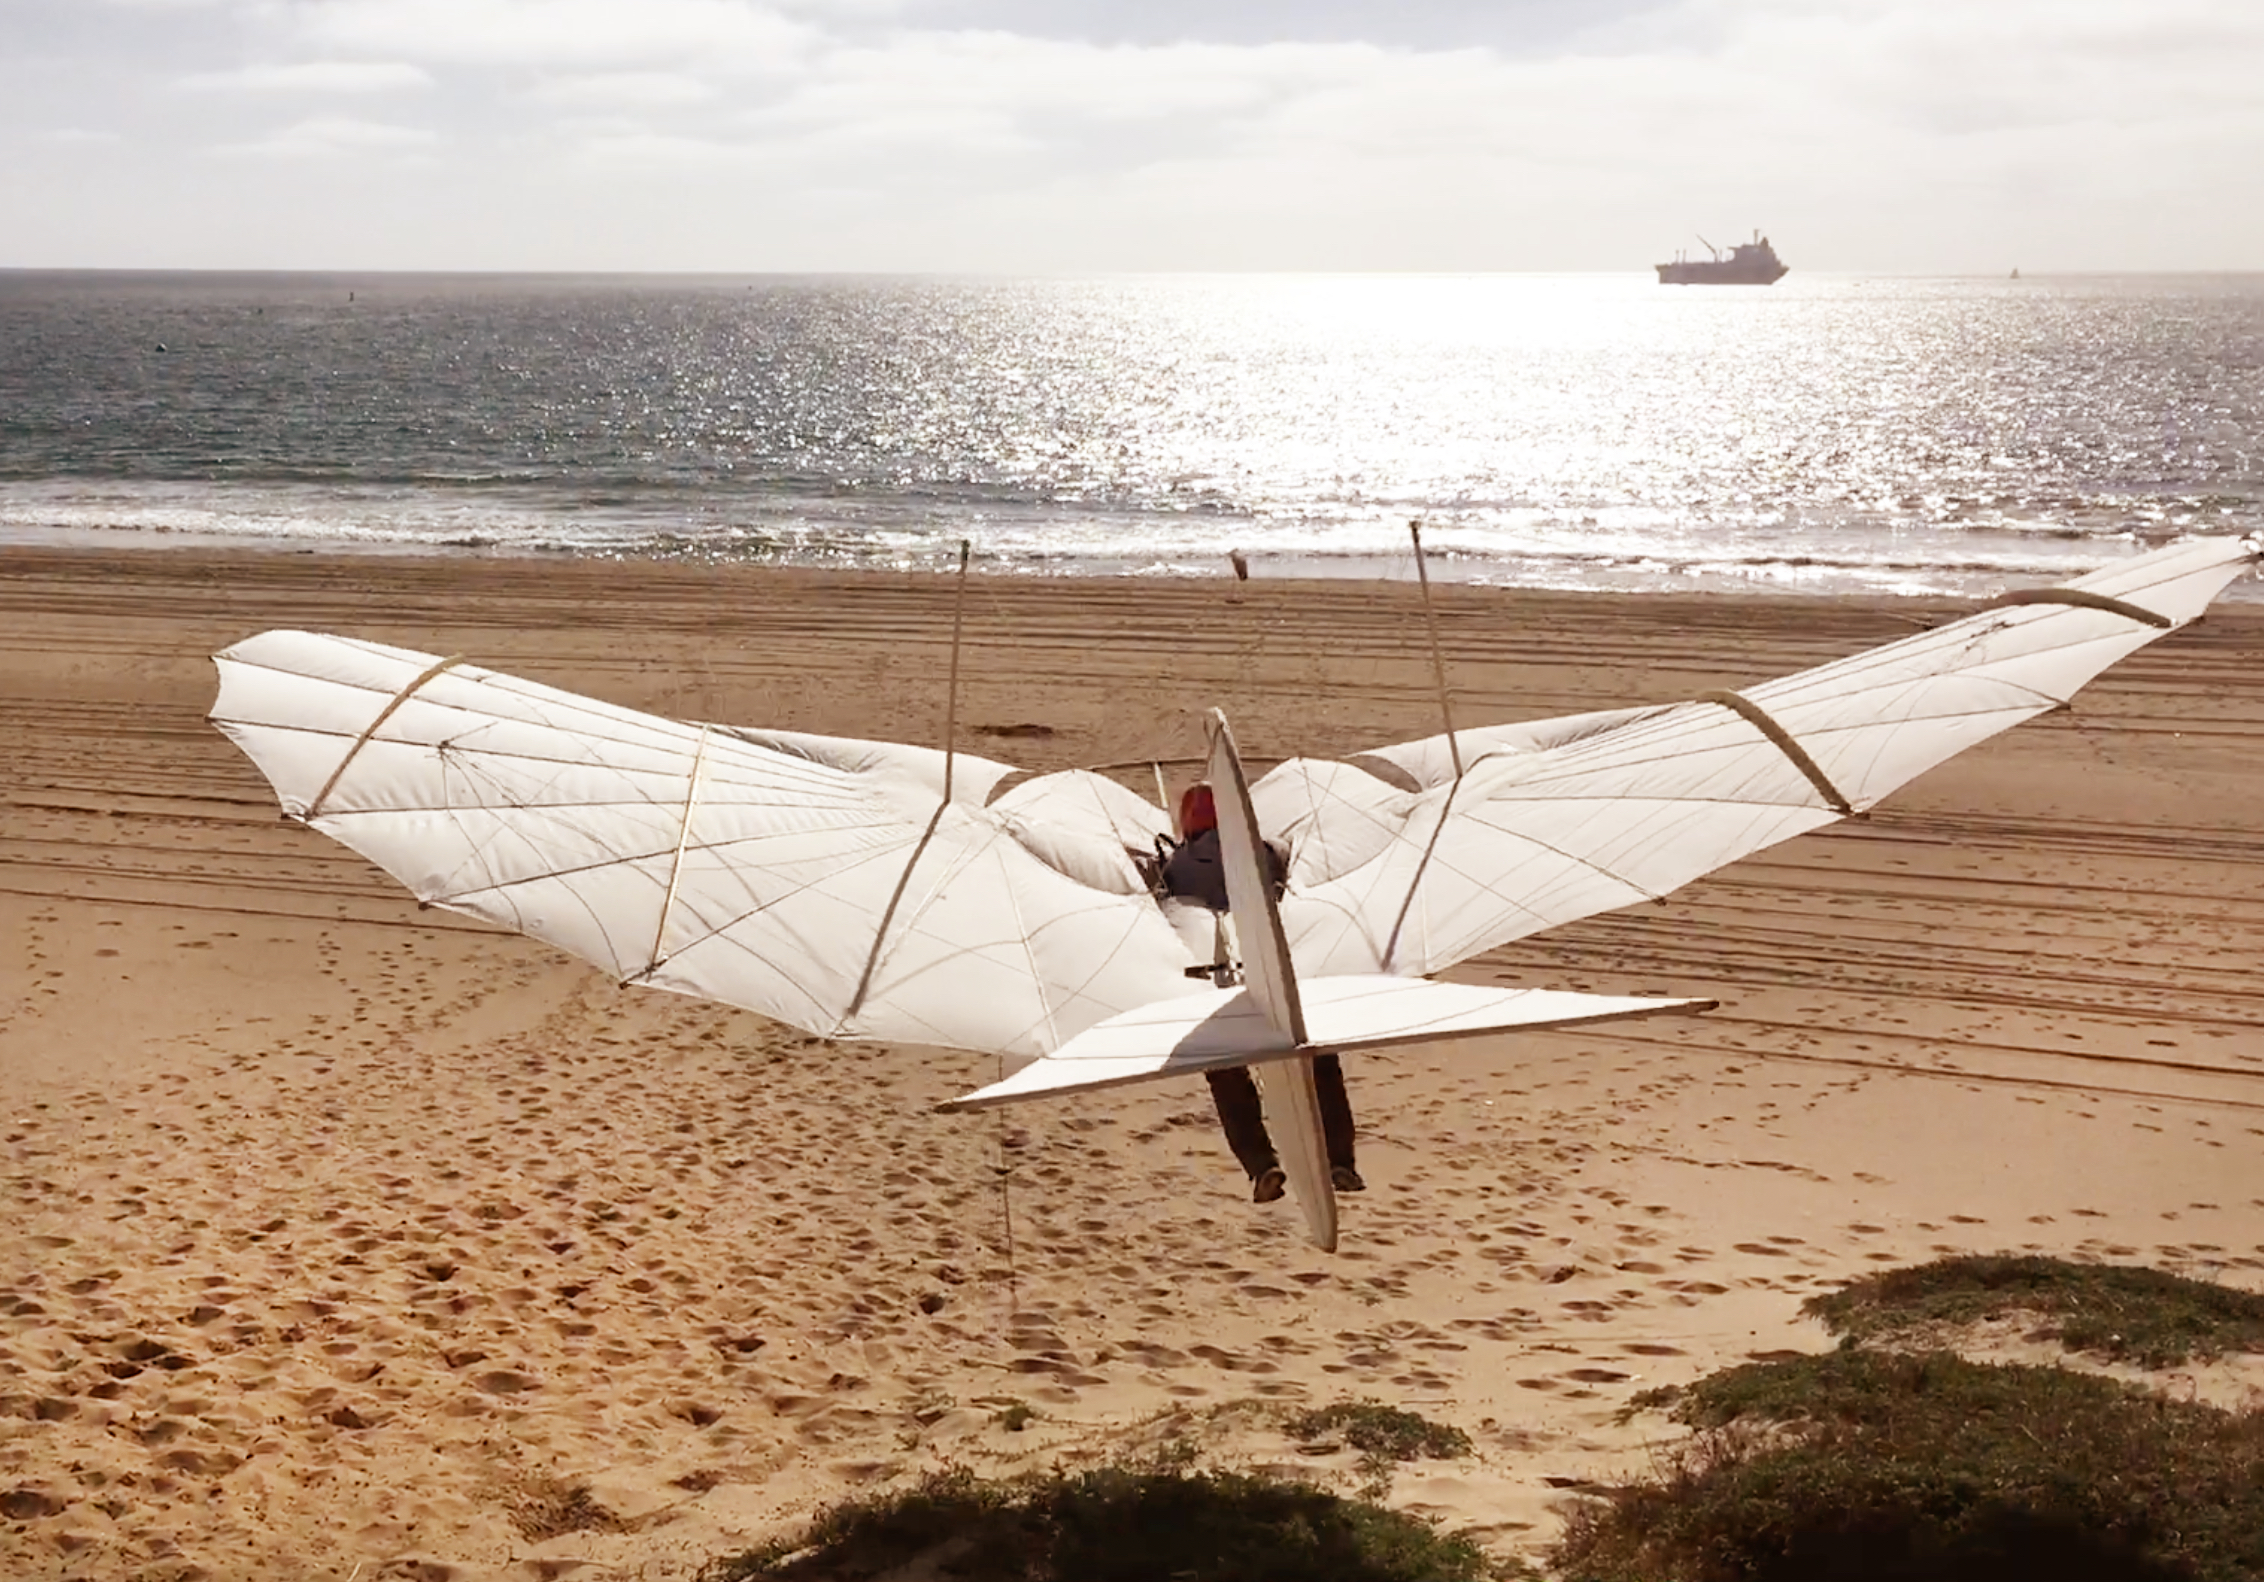 Andy Beem flying the Otto Lilienthal glider at Dockweiler State Beach